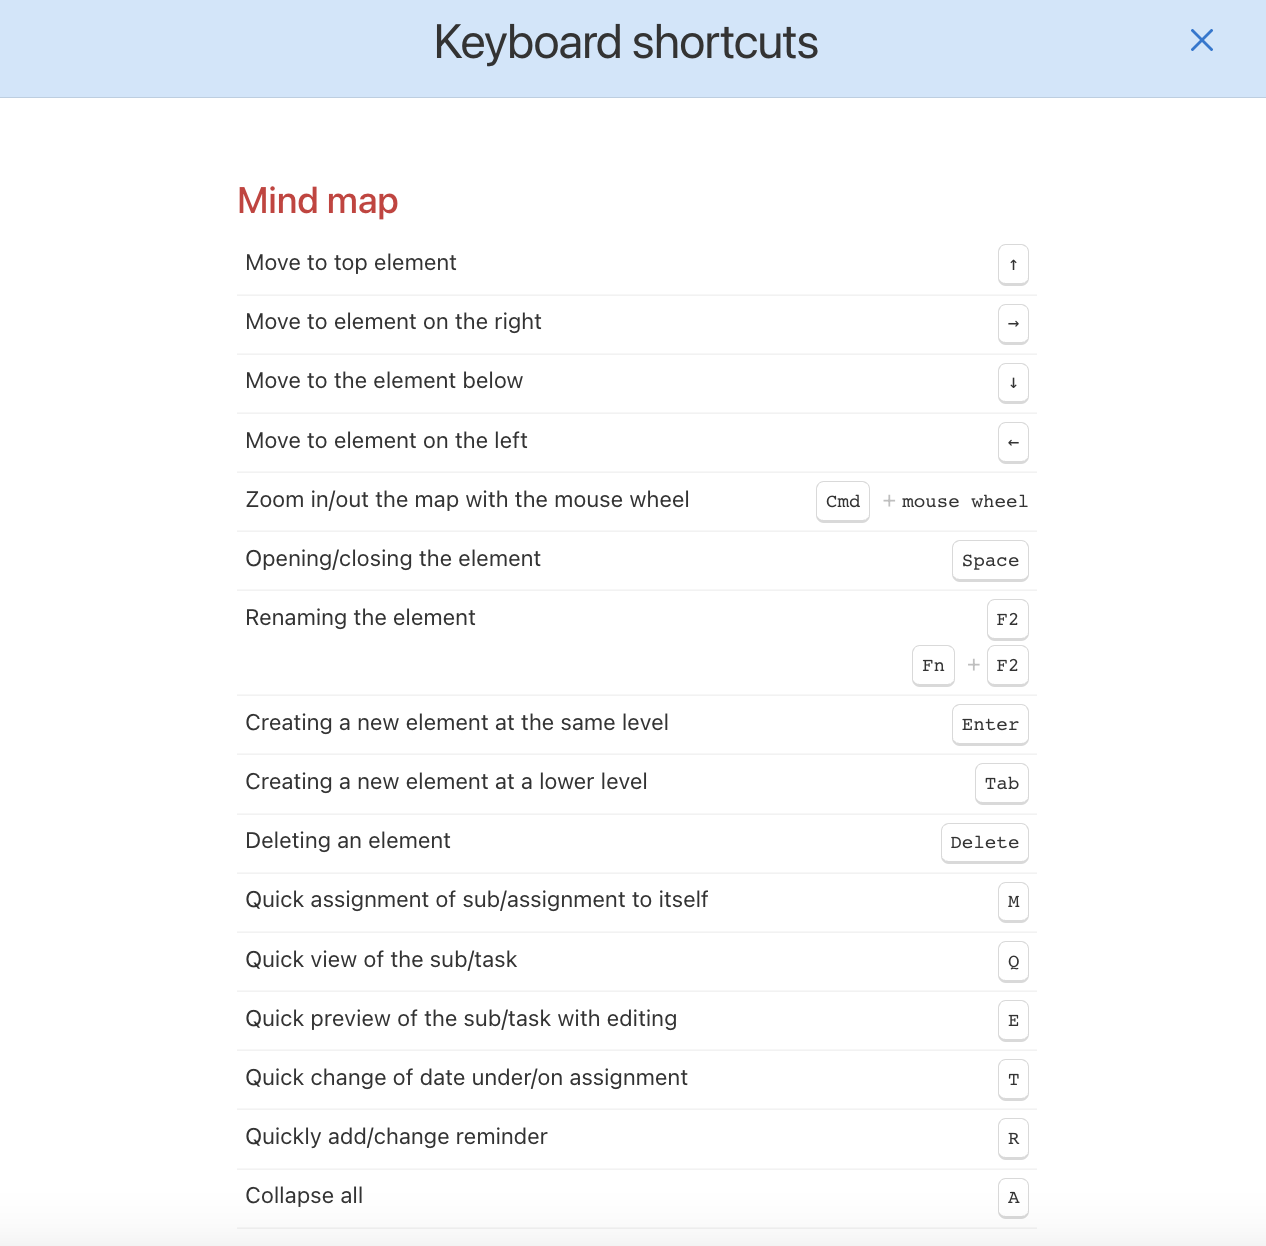 These are the keyboard shortcuts you may want to use in mind map.